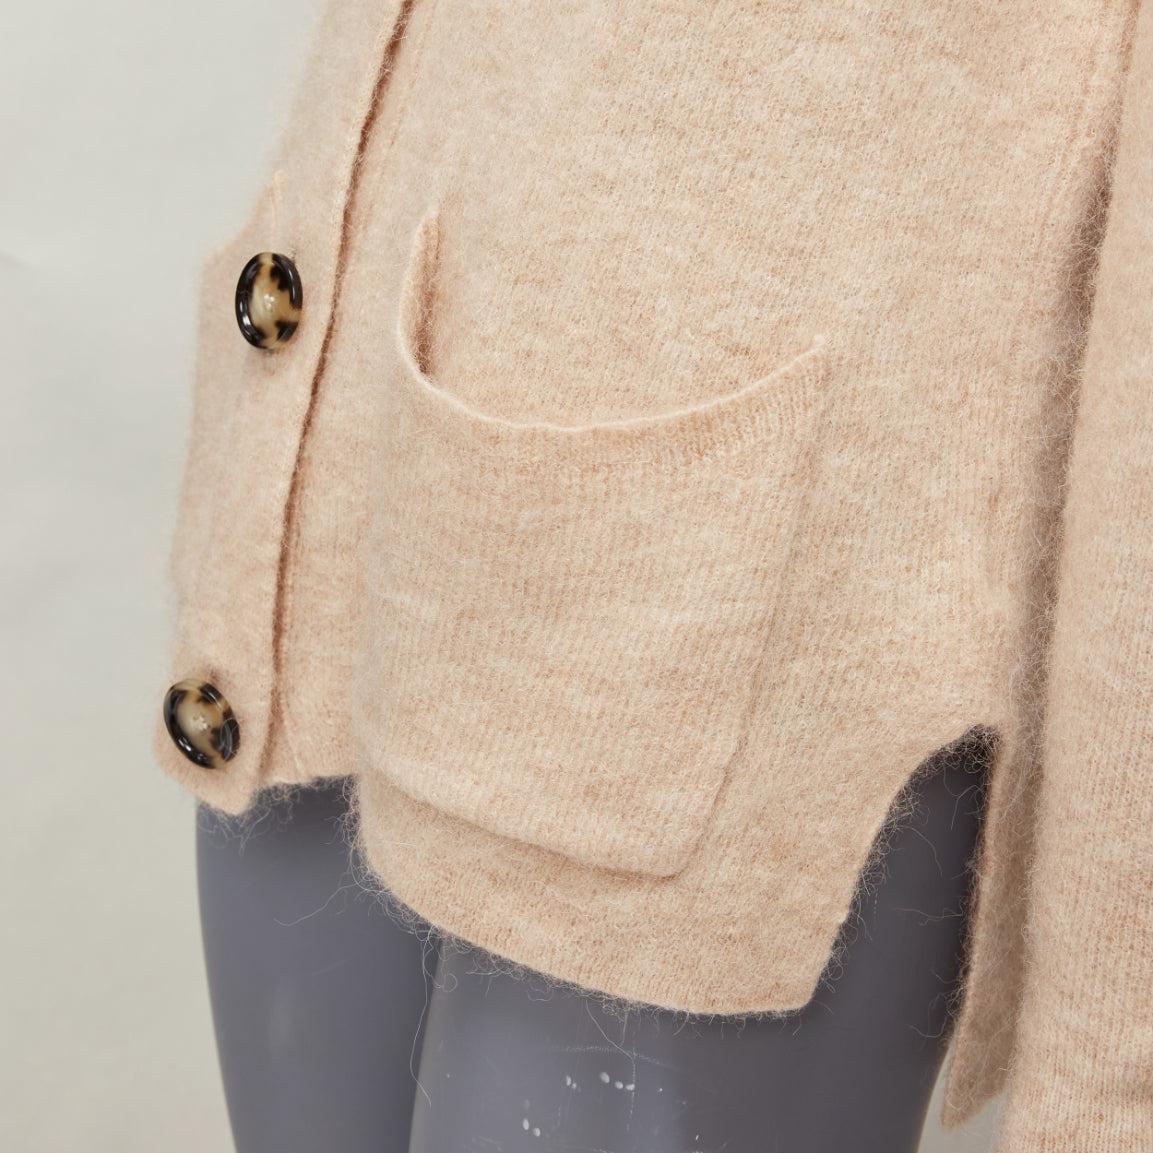 ACNE STUDIOS beige alpaca wool blend patch pocket large button front cardigan XS
Reference: KYCG/A00019
Brand: Acne Studios
Model: FN WN KNIT000071
Material: Alpaca, Wool, Nylon
Color: Beige
Pattern: Solid
Closure: Button
Made in: